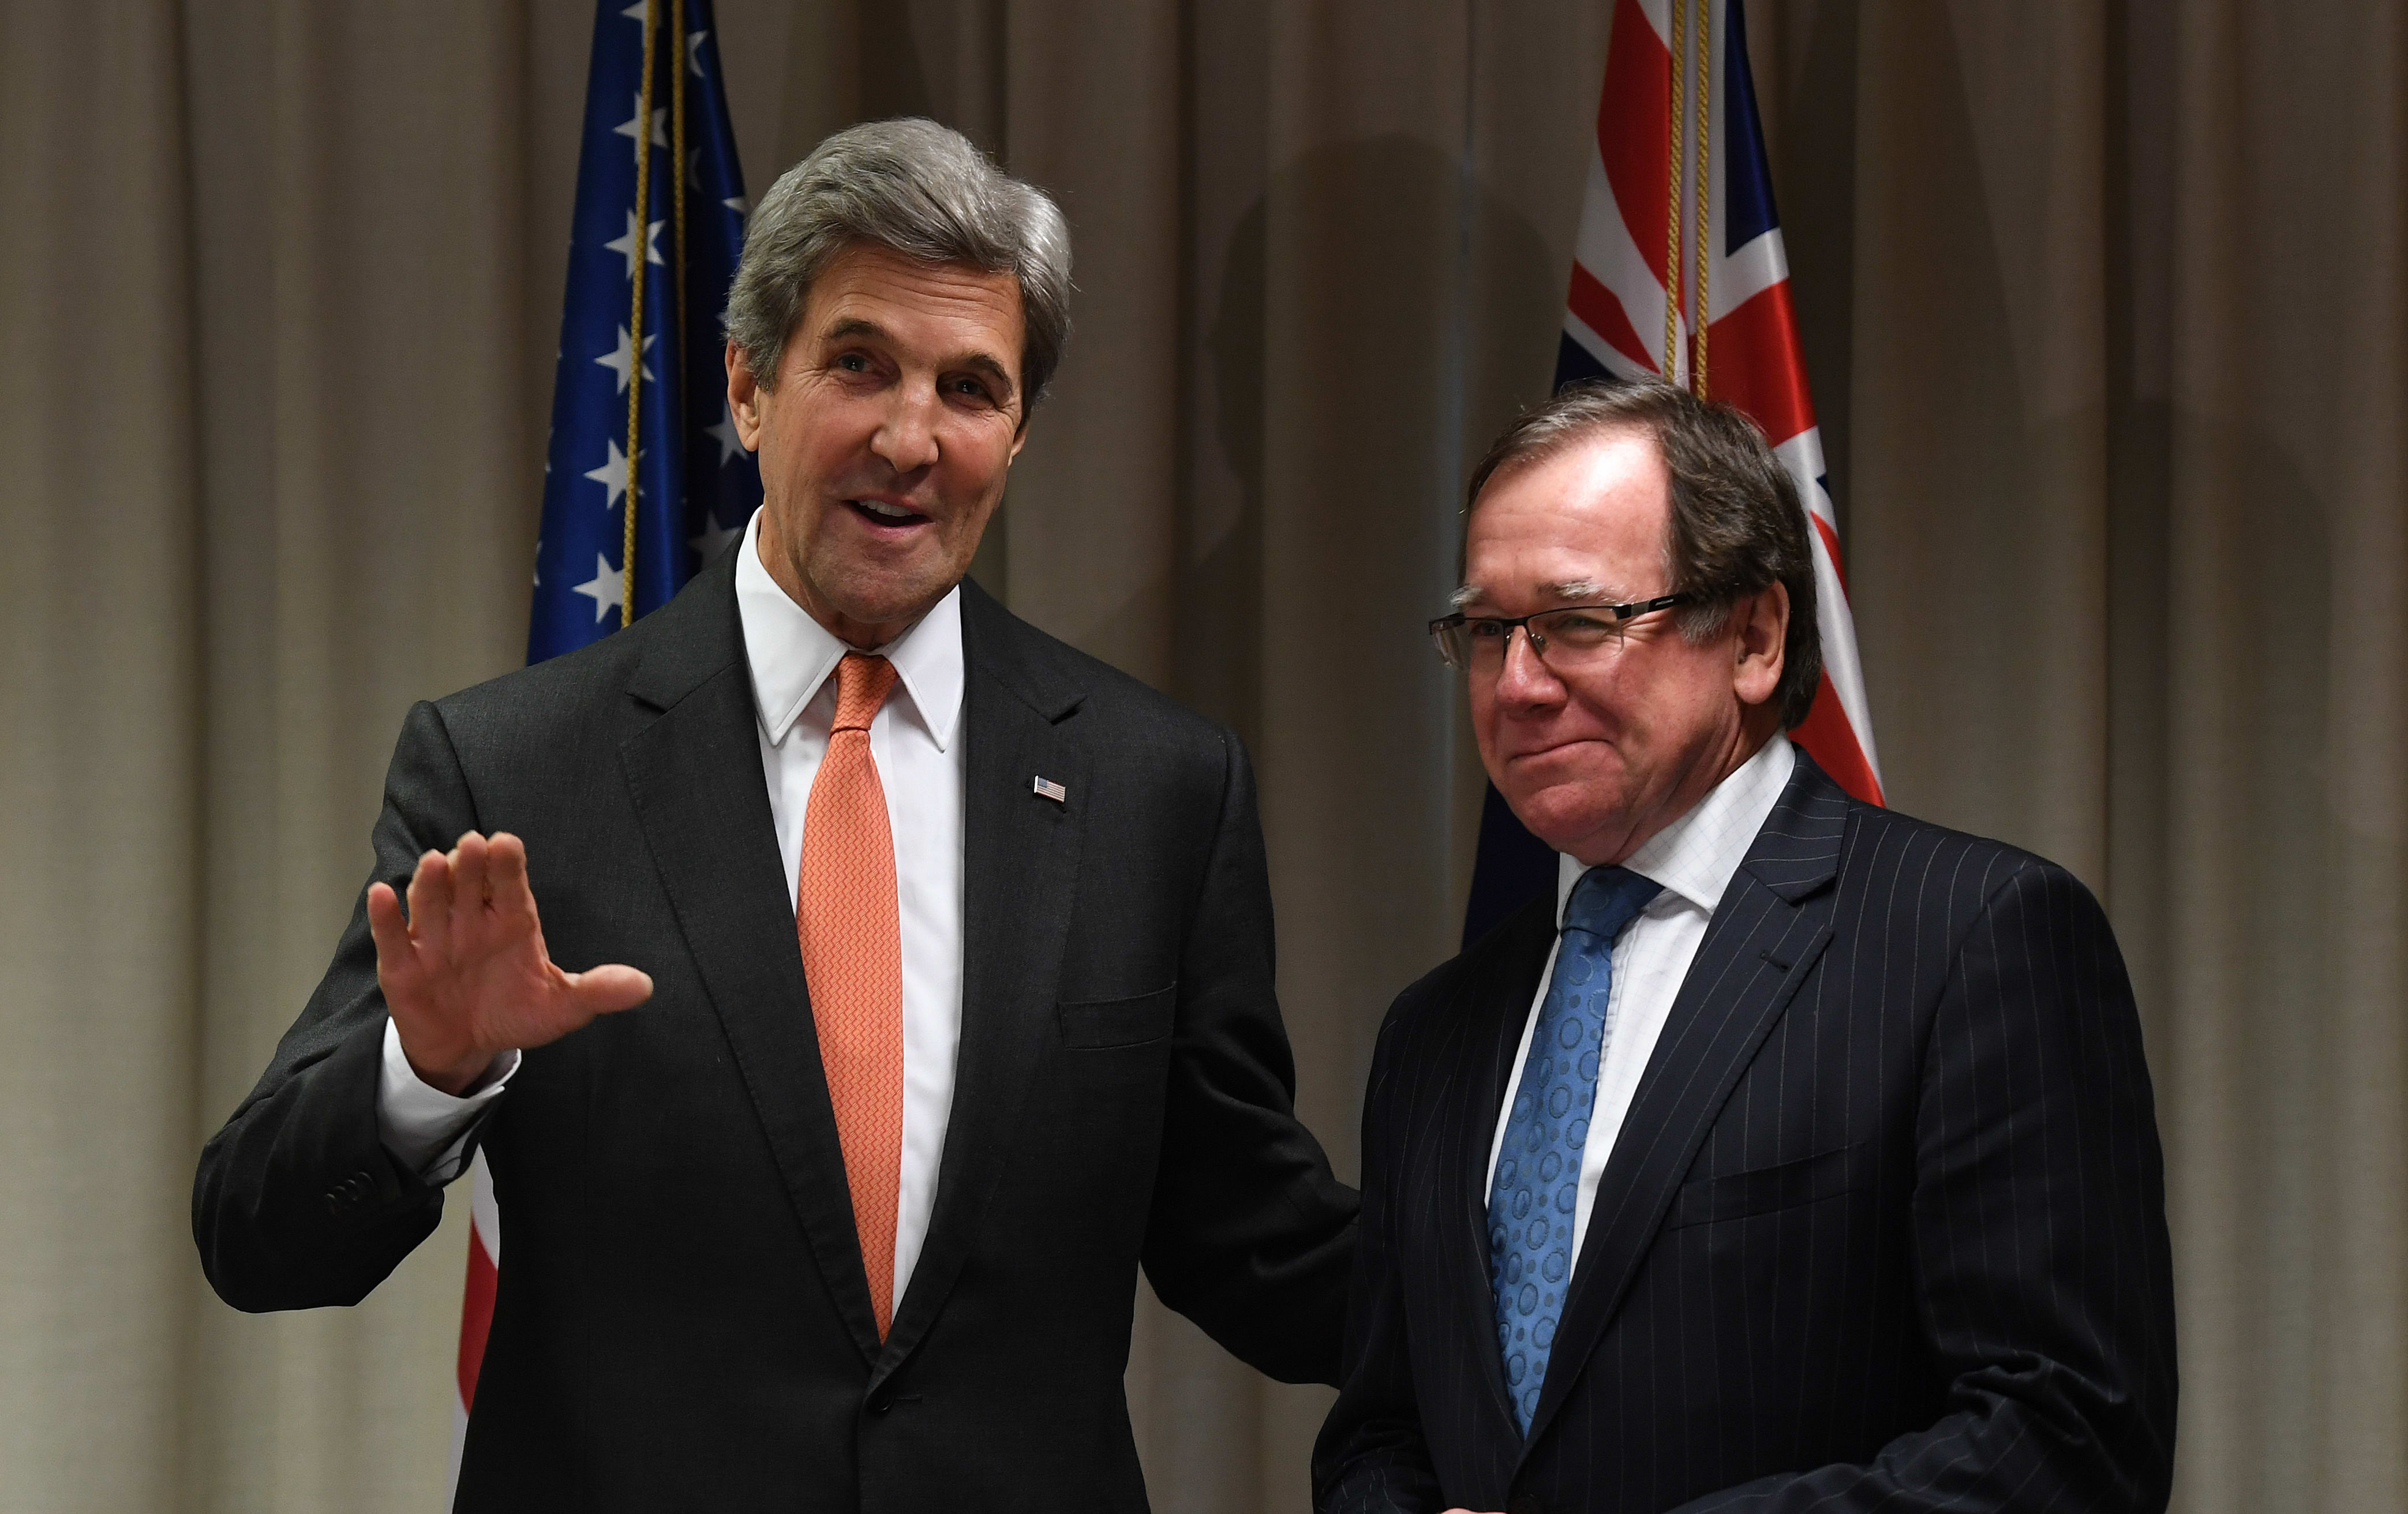 US Secretary of State John Kerry, at left, and New Zealand Foreign Minister Murray McCully